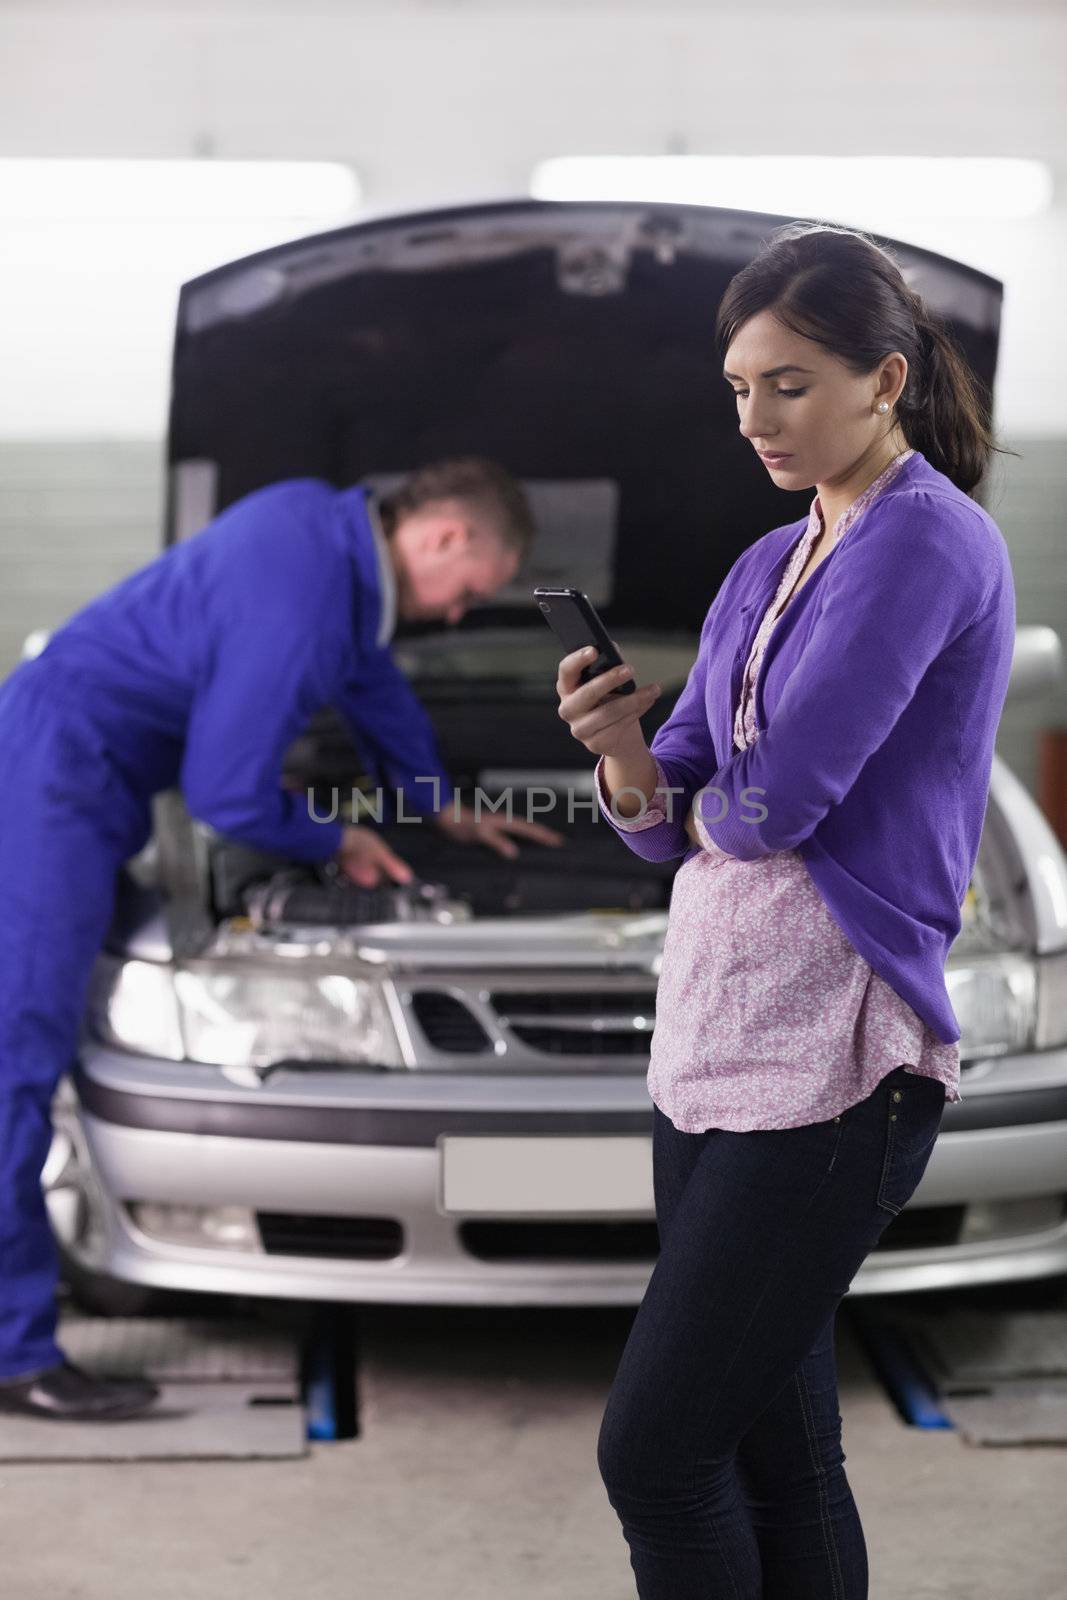 Woman looking a her mobile phone next to a mechanic by Wavebreakmedia